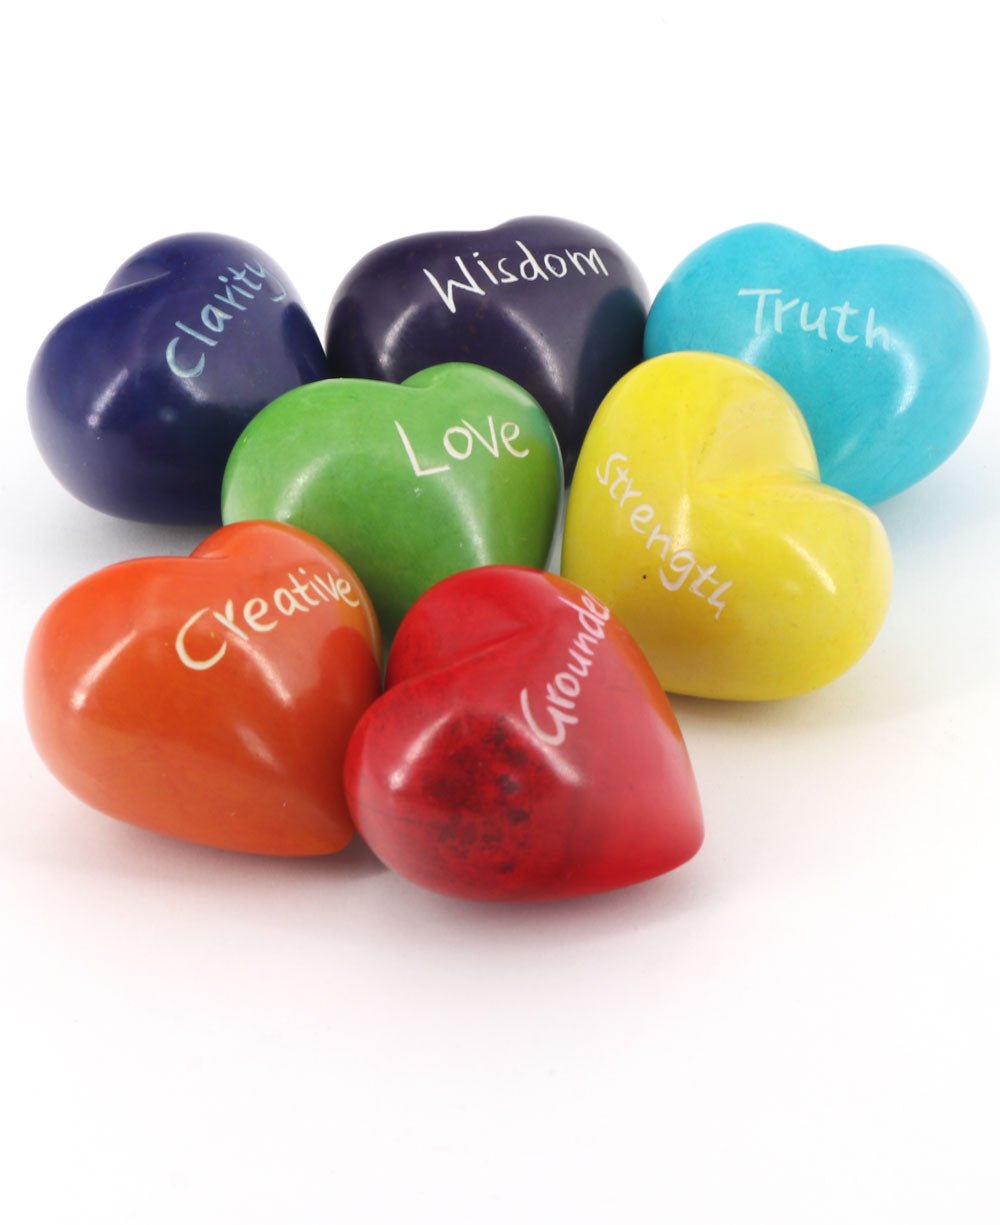 Handmade Soapstone Set of 7 Chakra Hearts With Inspiration - Paperweights